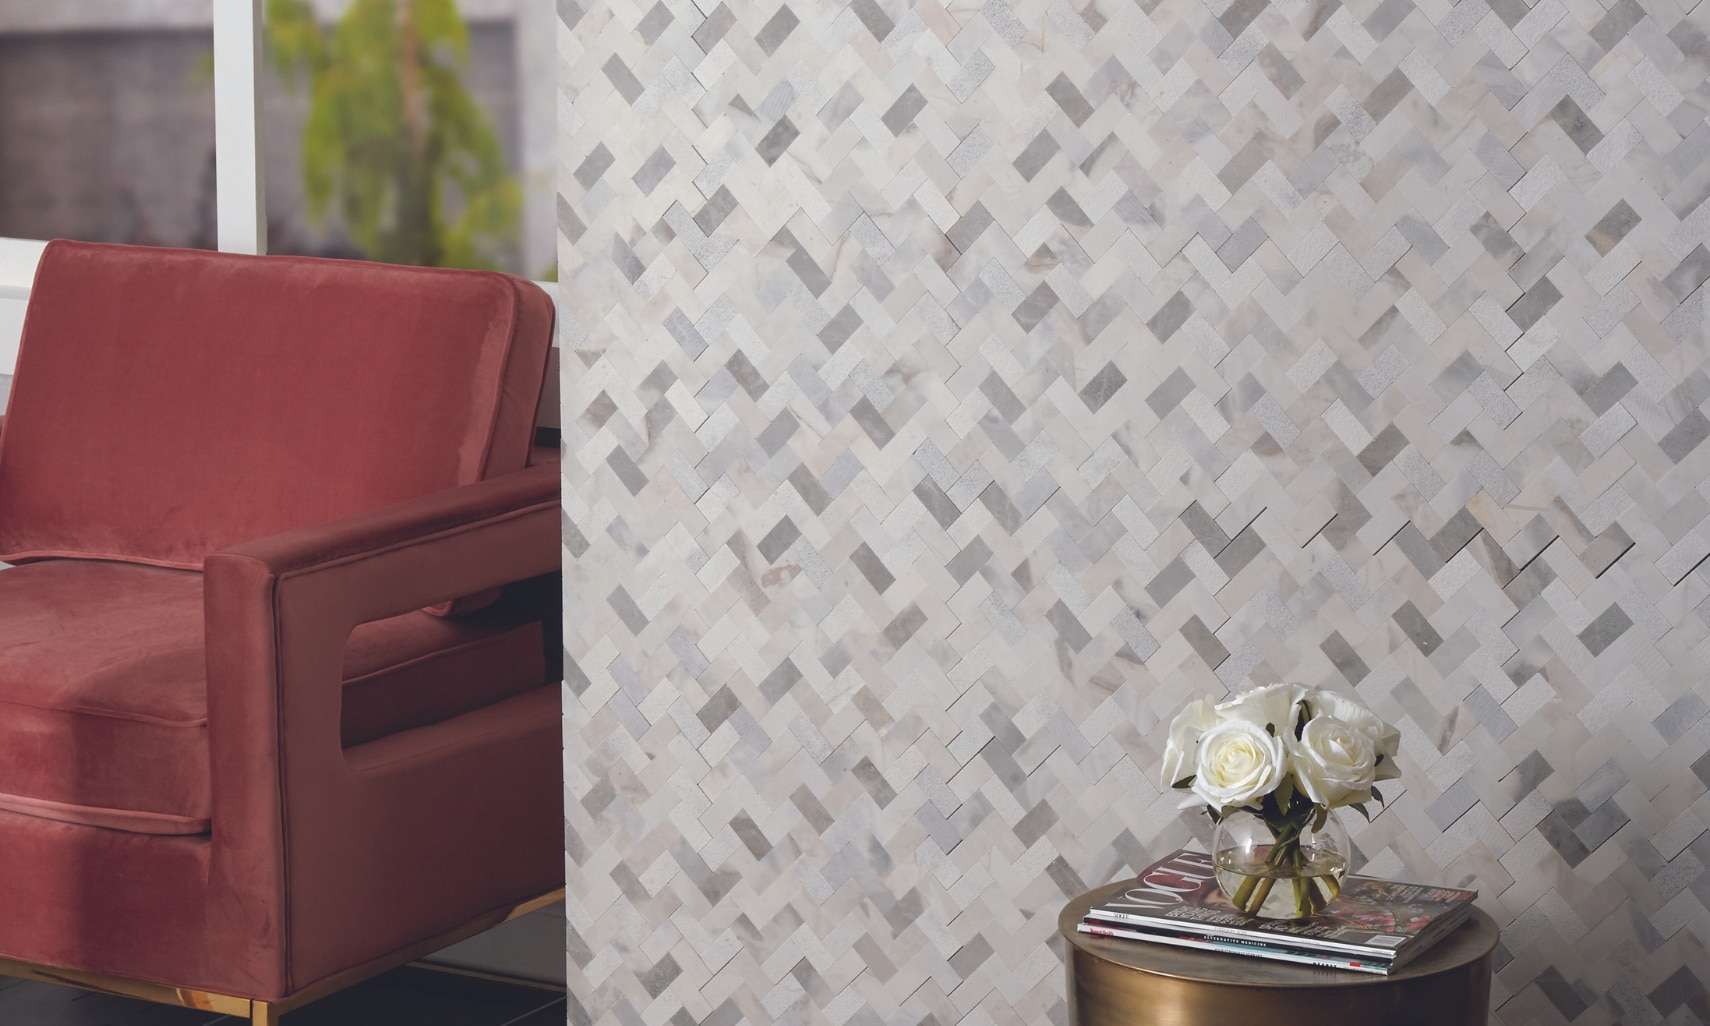 Groutless mosaics: White, gray and beige marble mosaic wall that does not require grout, red velvet chair, and side table holding white roses.